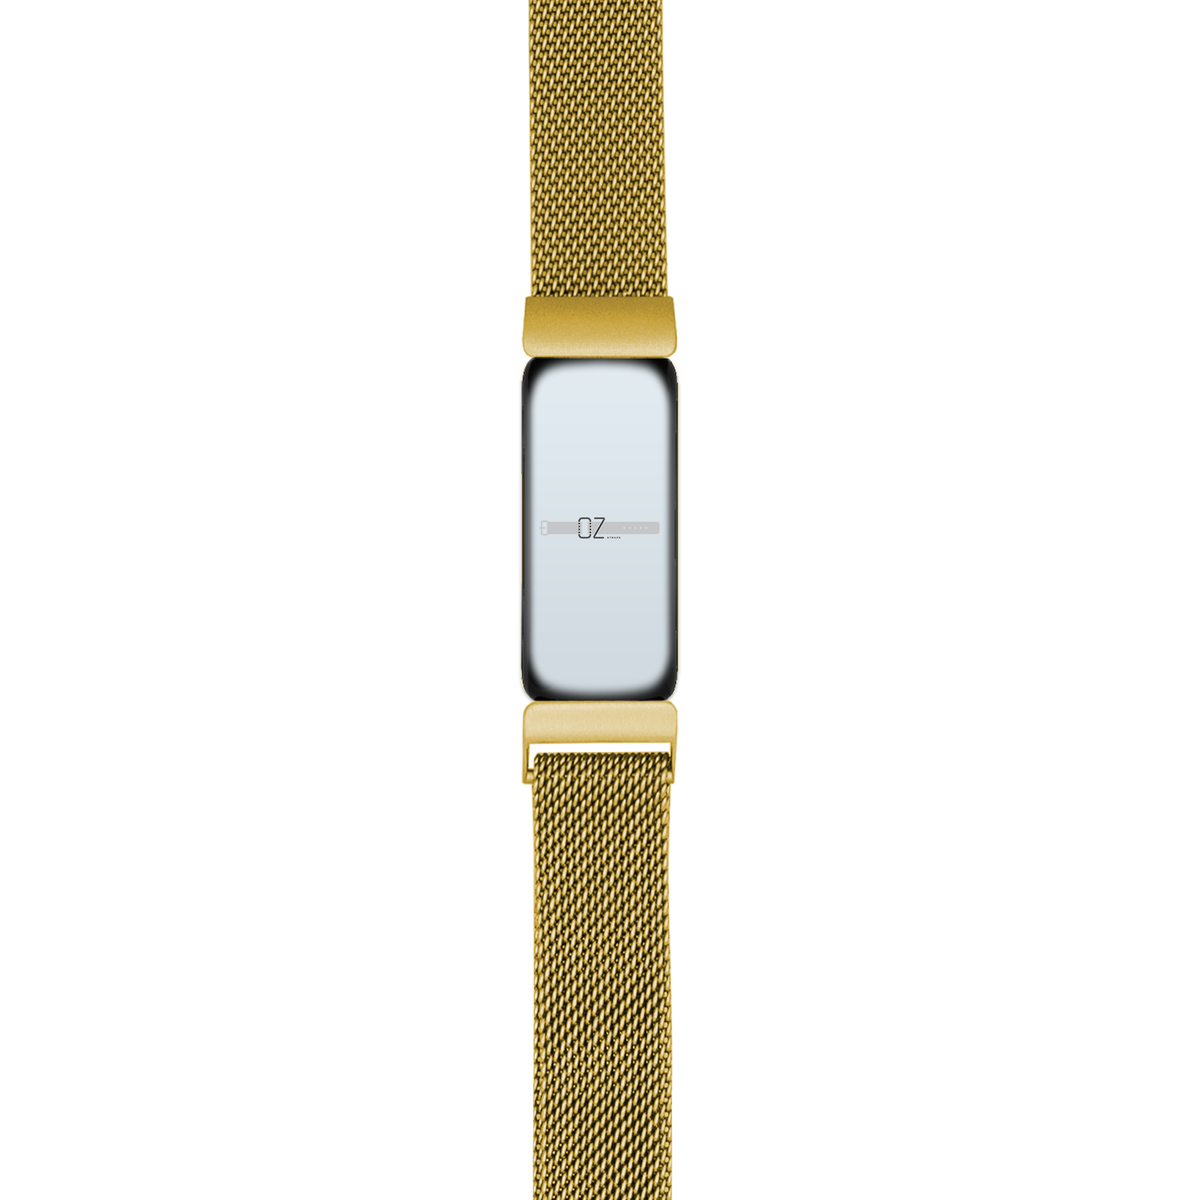 Milanese Loop Fitbit Ace 3 / Inspire 2 Band